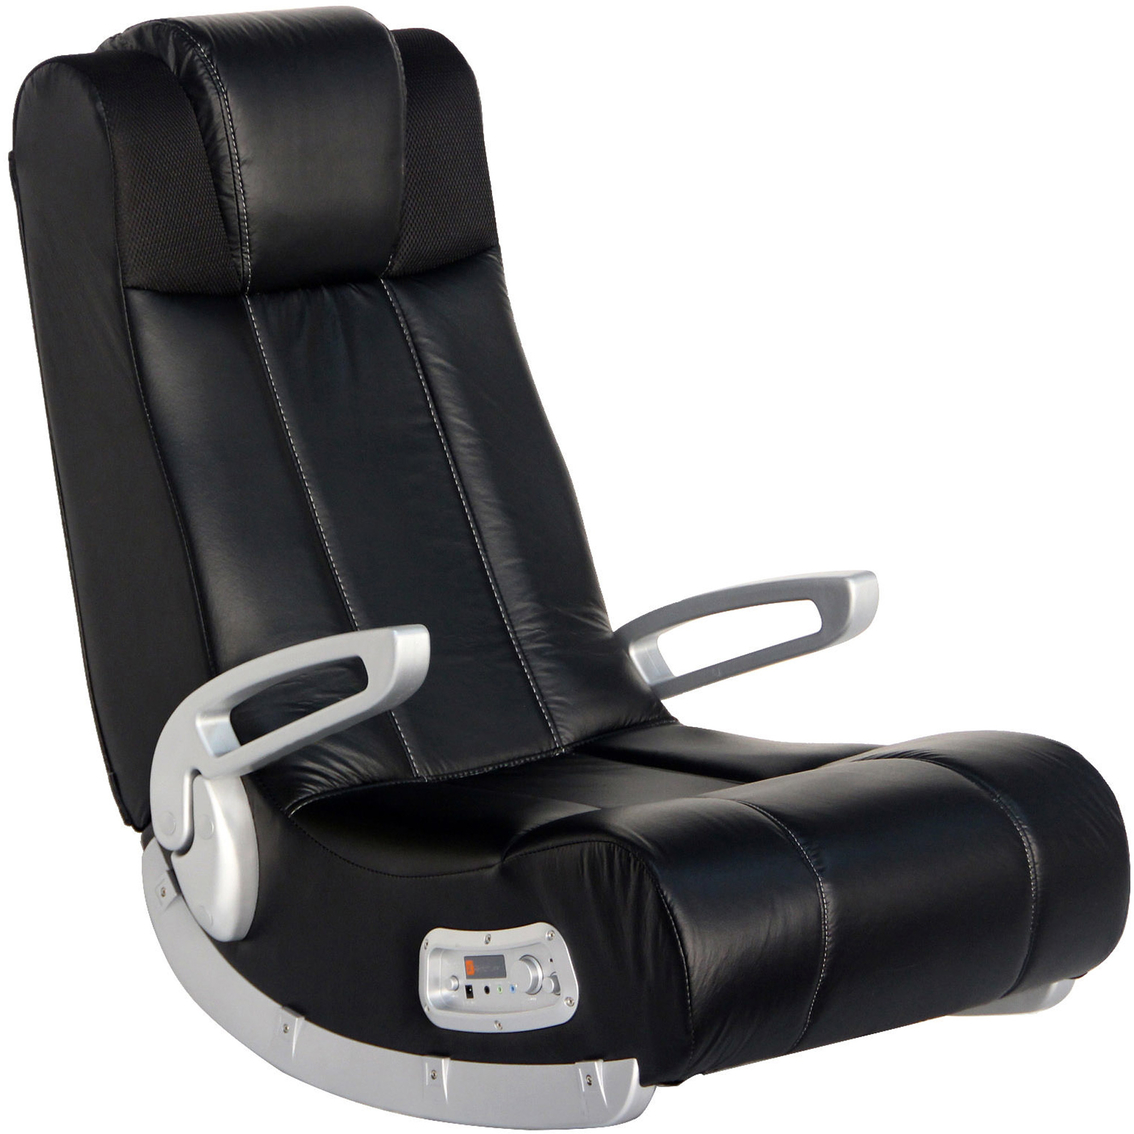 National Brand Floor Rocker Gaming Chair With Audio Pc